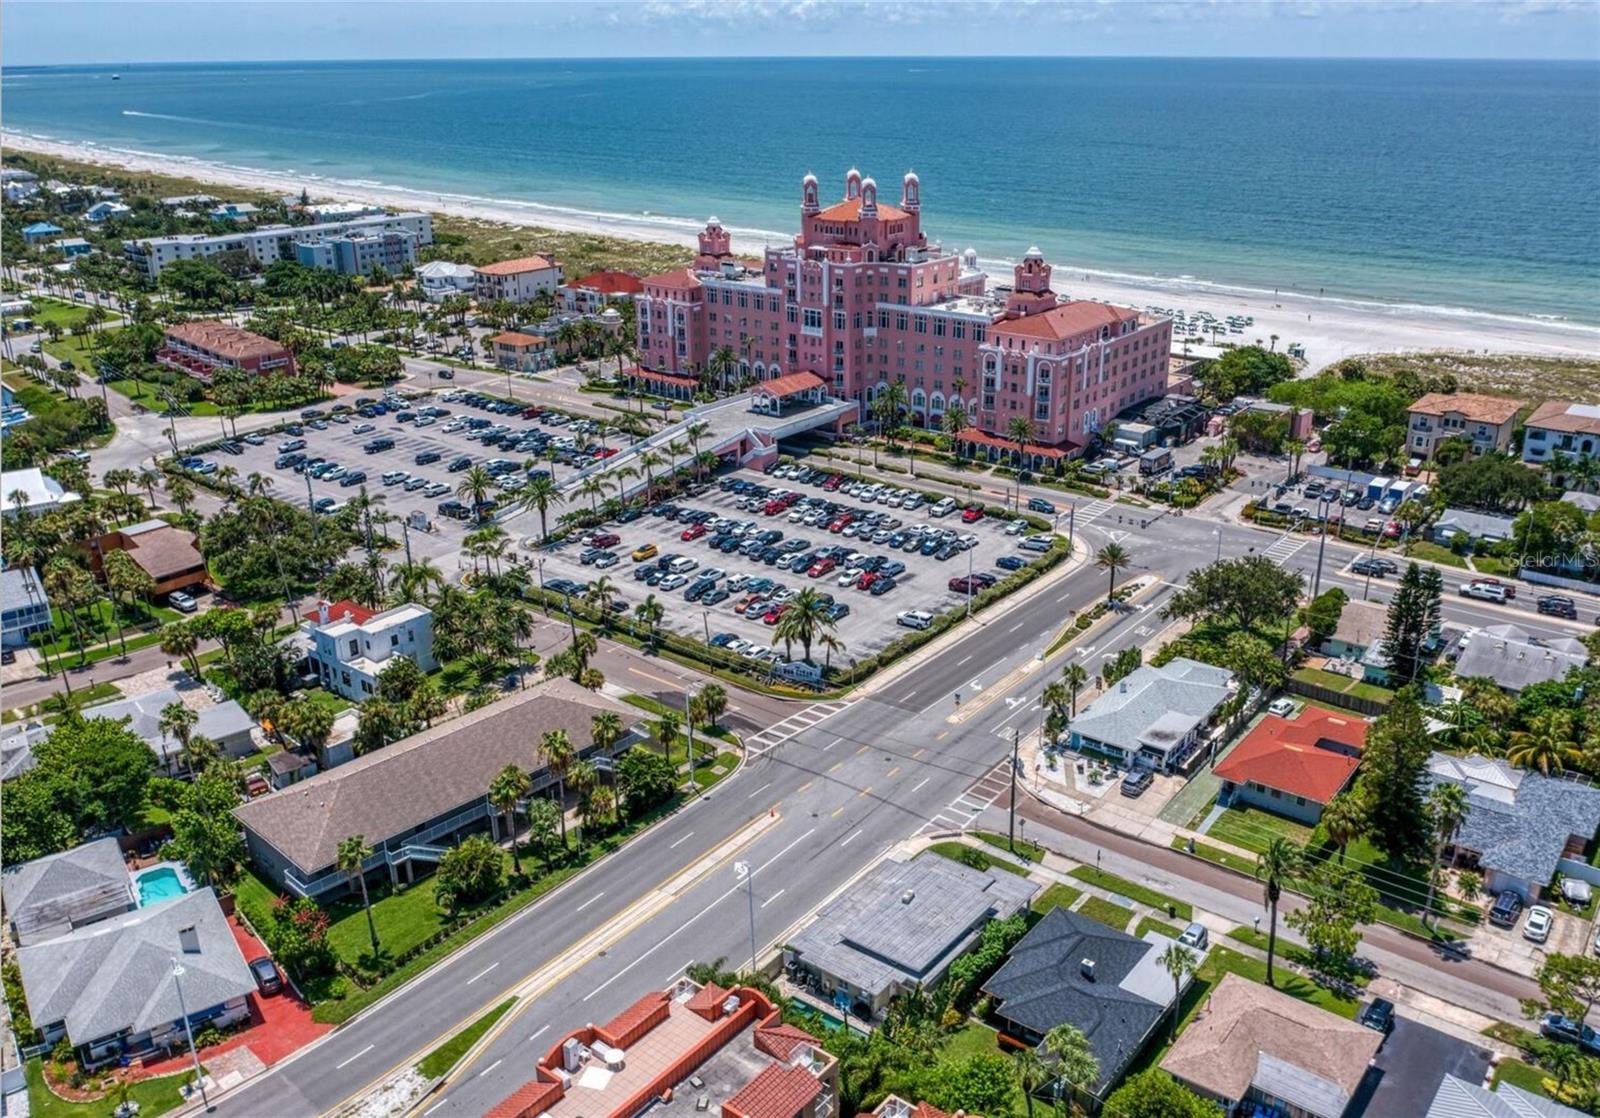 Iconic Don Cesar Hotel and St. Pete Beach